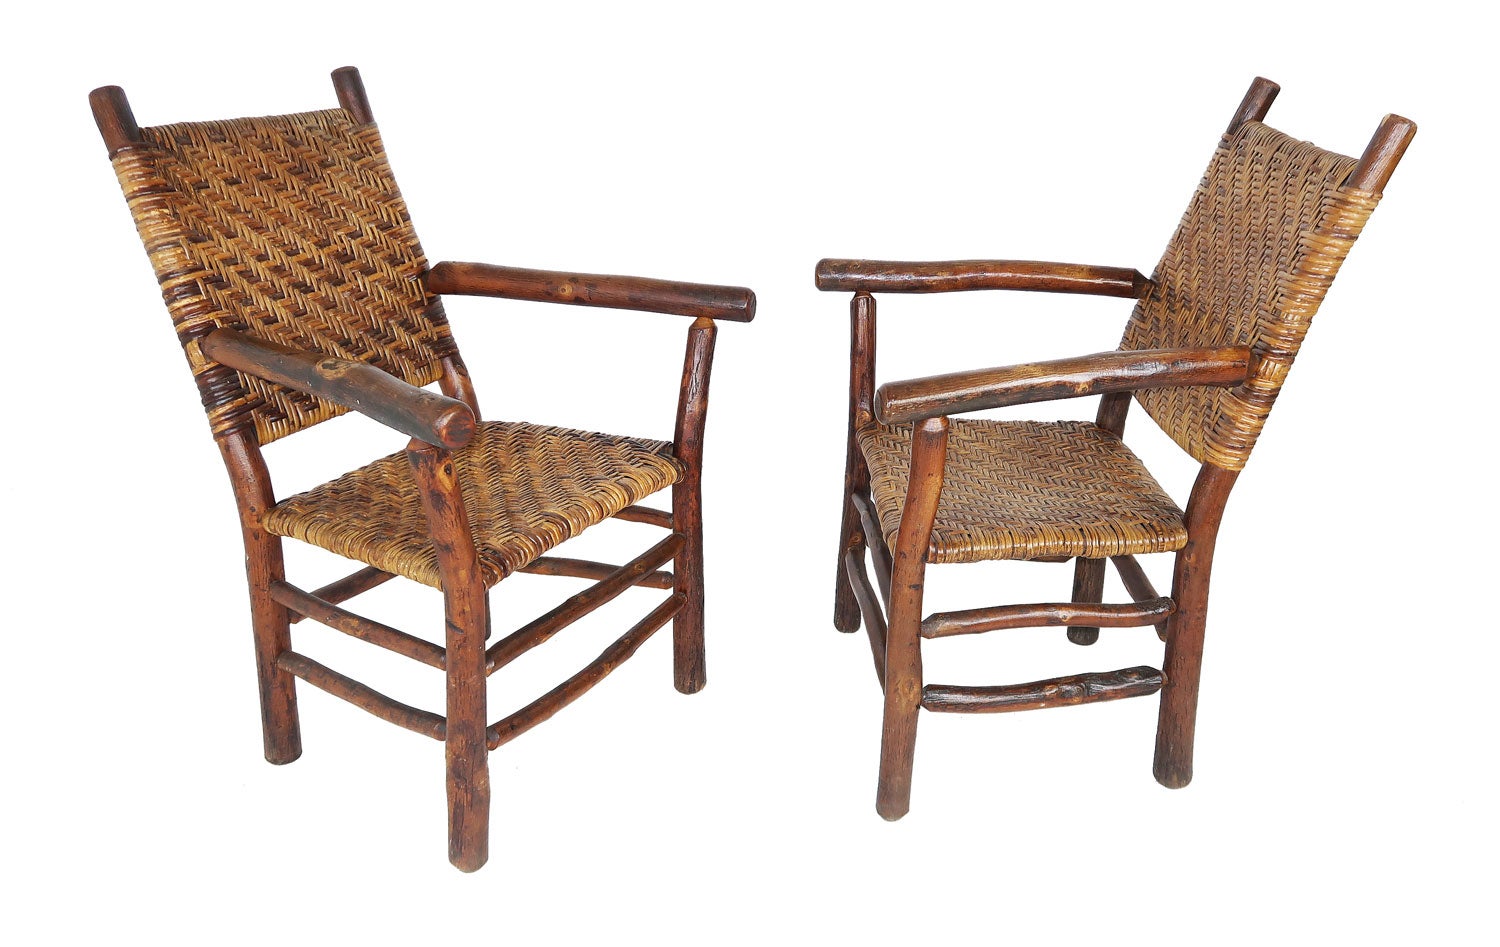 Set of old hickory arm chairs. This pair of old hickory from Martinsville, Indiana arm chairs are in pristine condition and have all original cane seats and backing. The chairs have the original seats and back with great old natural undisturbed